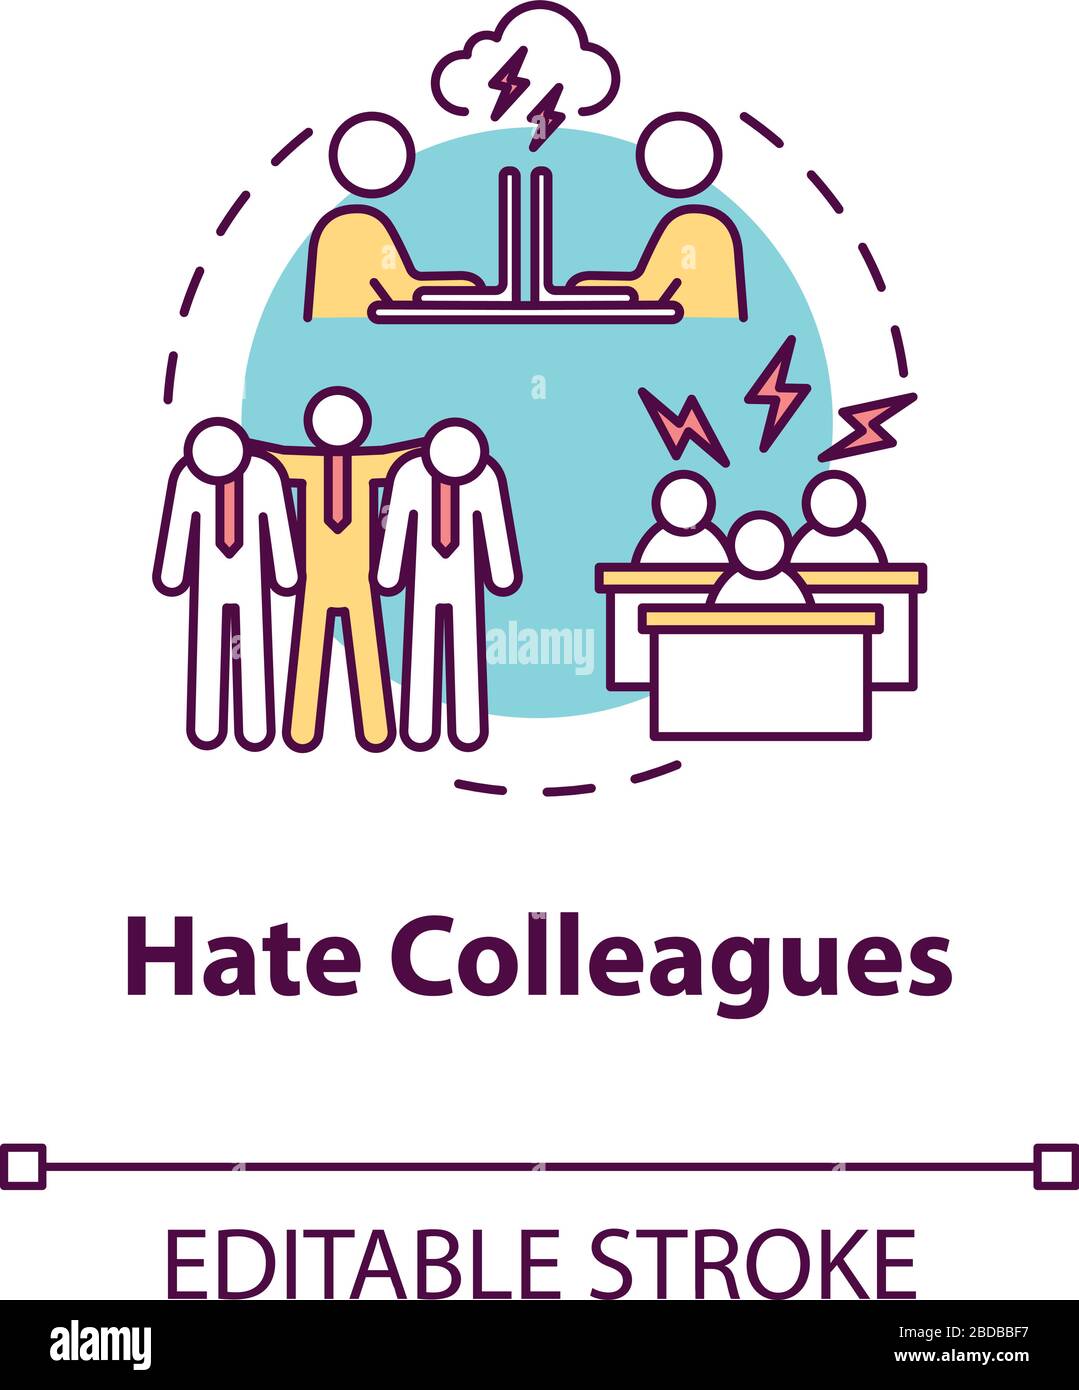 Hate colleagues concept icon. Problems at workplace. Displeased with coworkers. Burnout cause idea thin line illustration. Vector isolated outline RGB Stock Vector